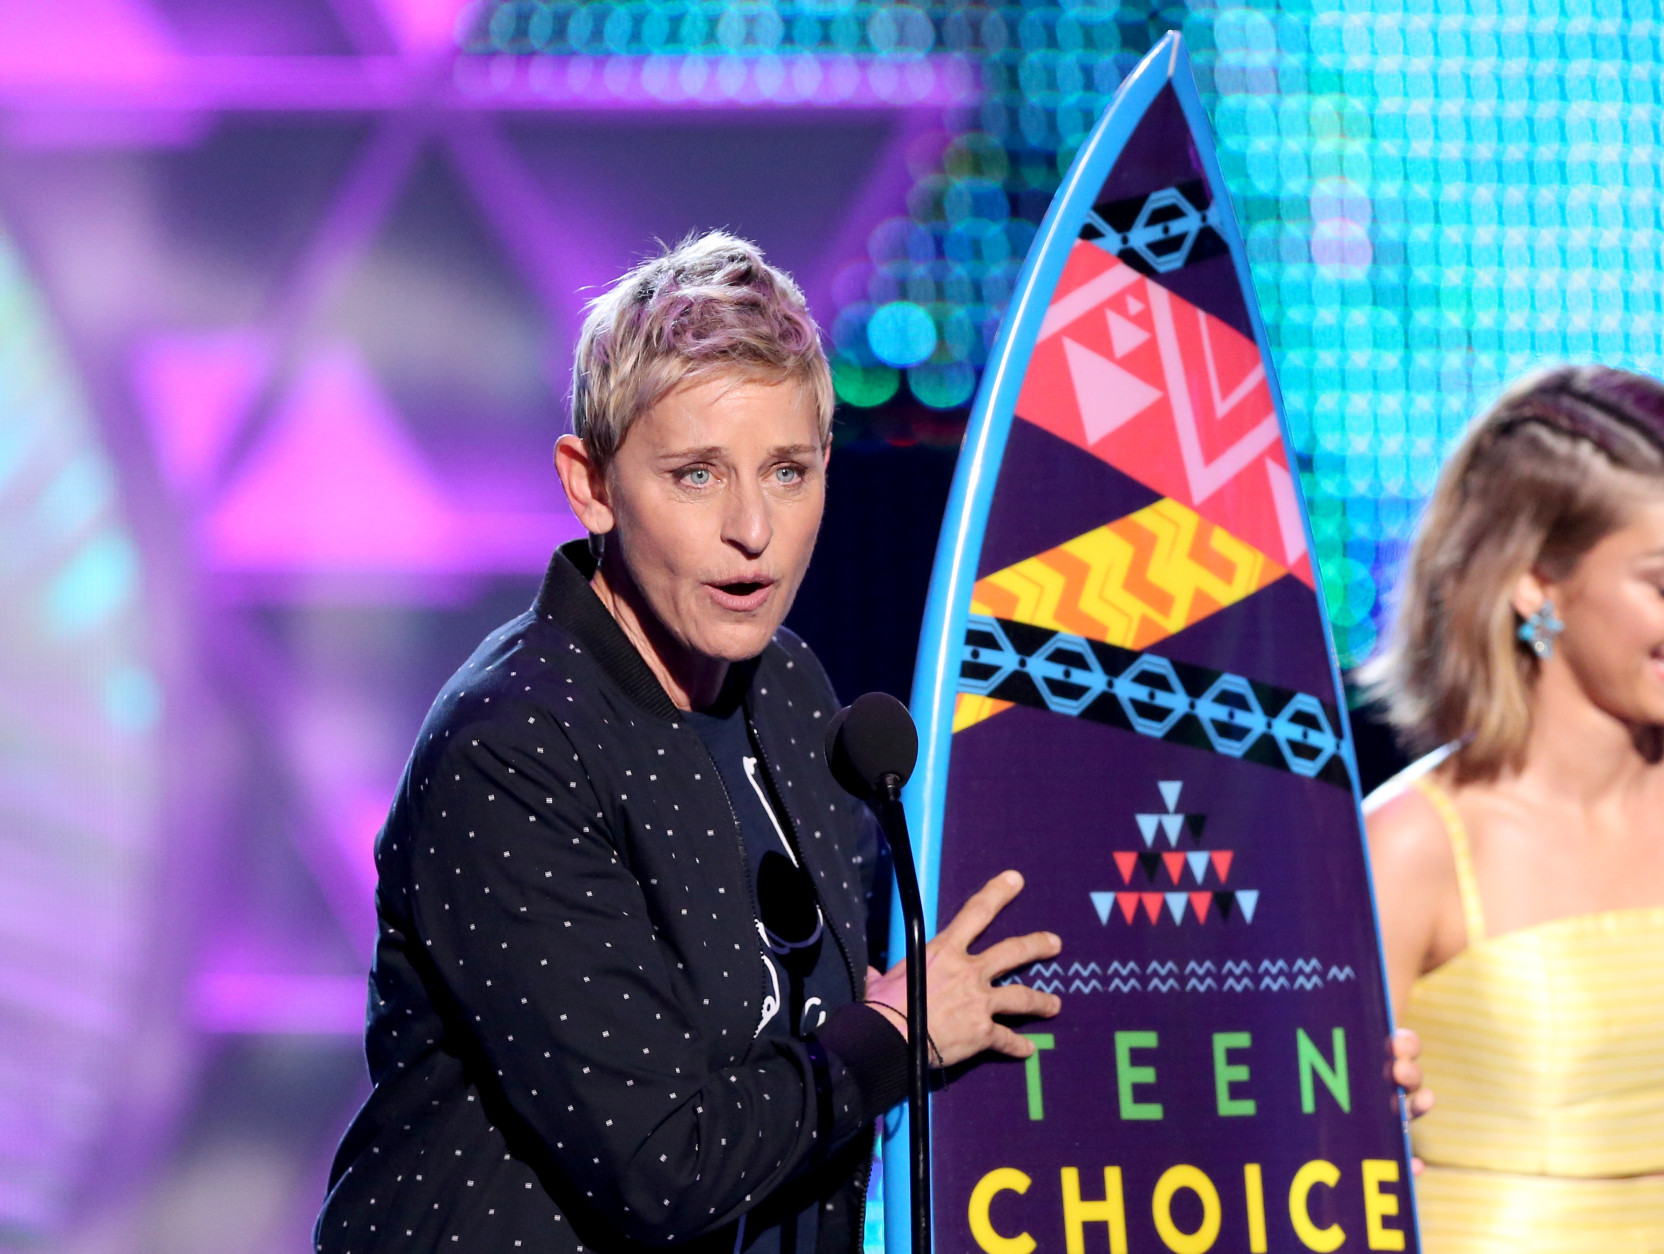 Ellen DeGeneres accepts the choice comedian award at the Teen Choice Awards at the Galen Center on Sunday, Aug. 16, 2015, in Los Angeles. (Photo by Matt Sayles/Invision/AP)